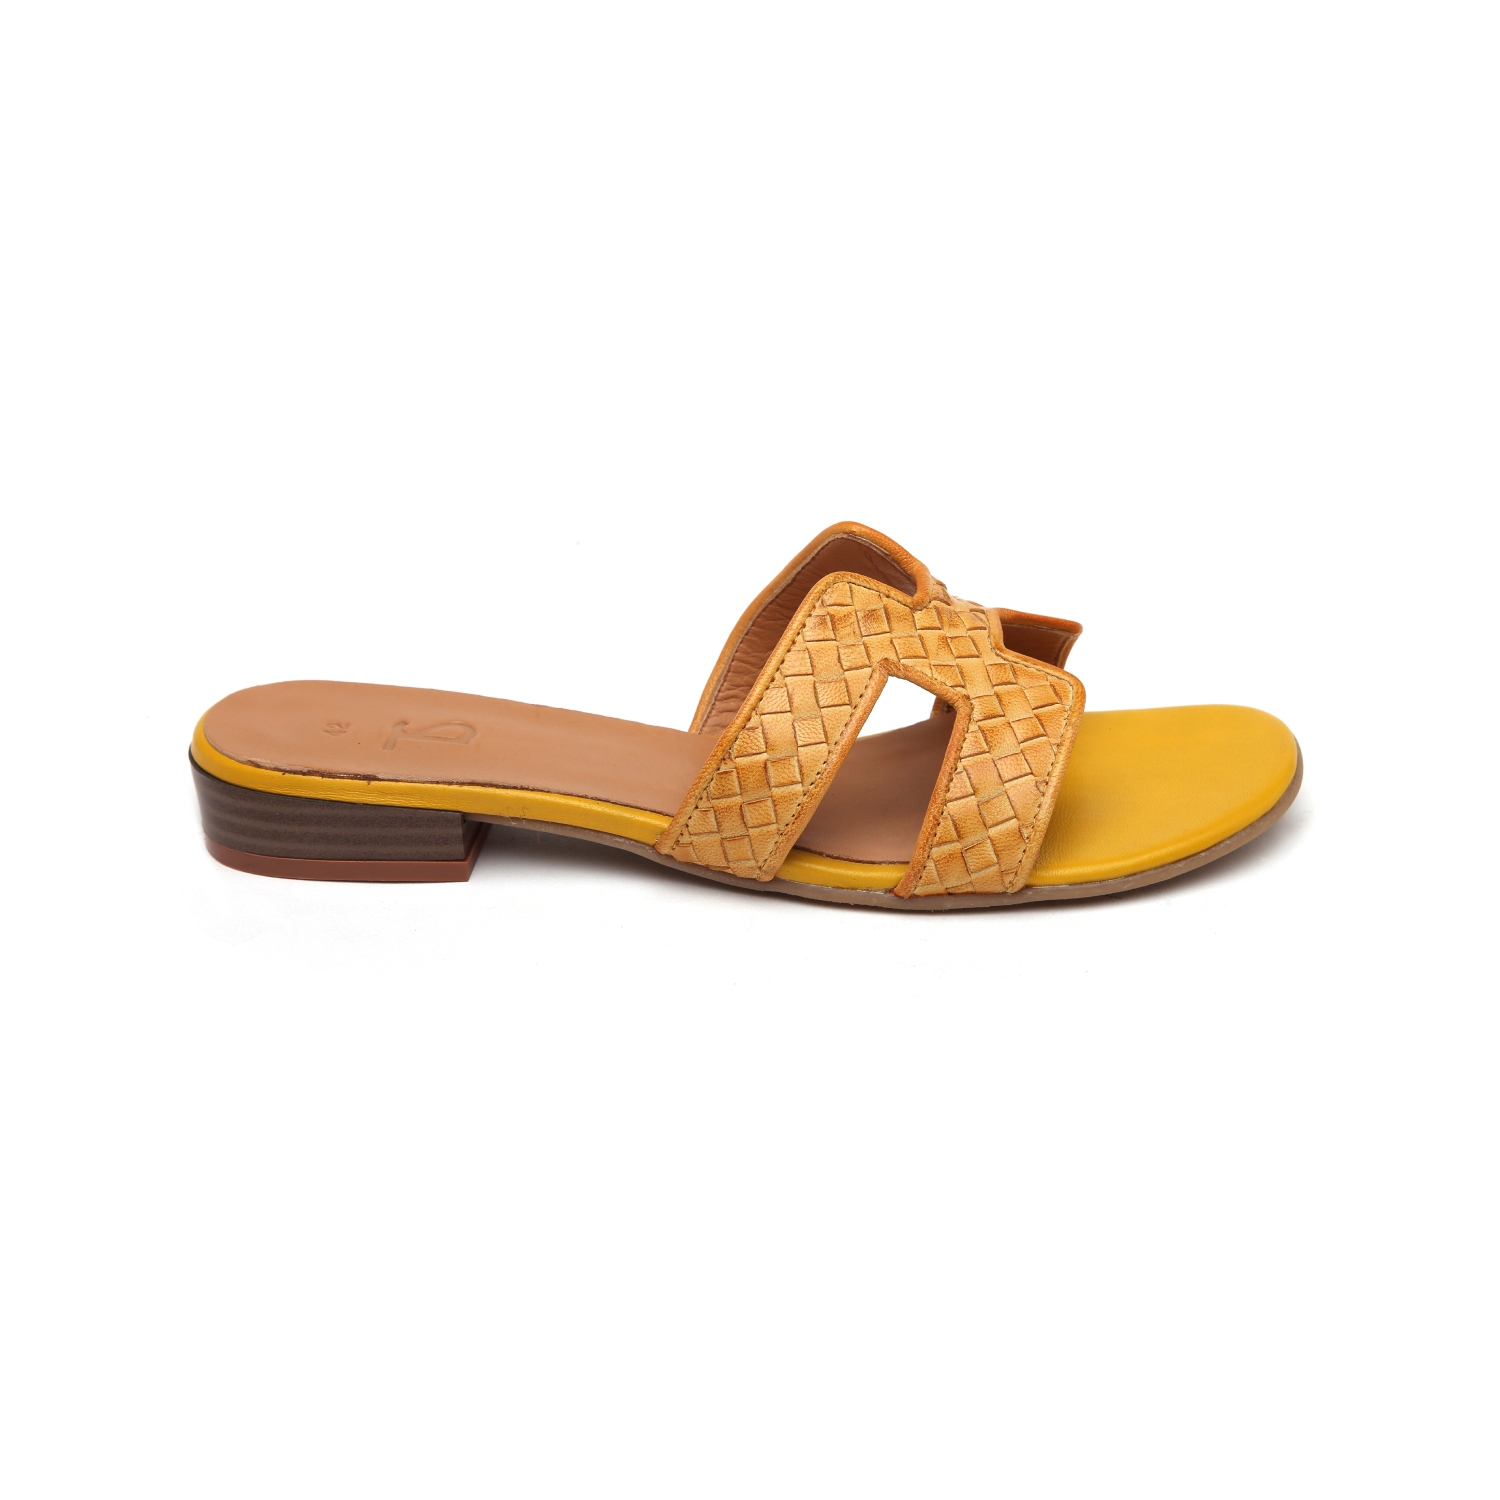 Buy Mustard Leather Sandals For Women | Indyverse